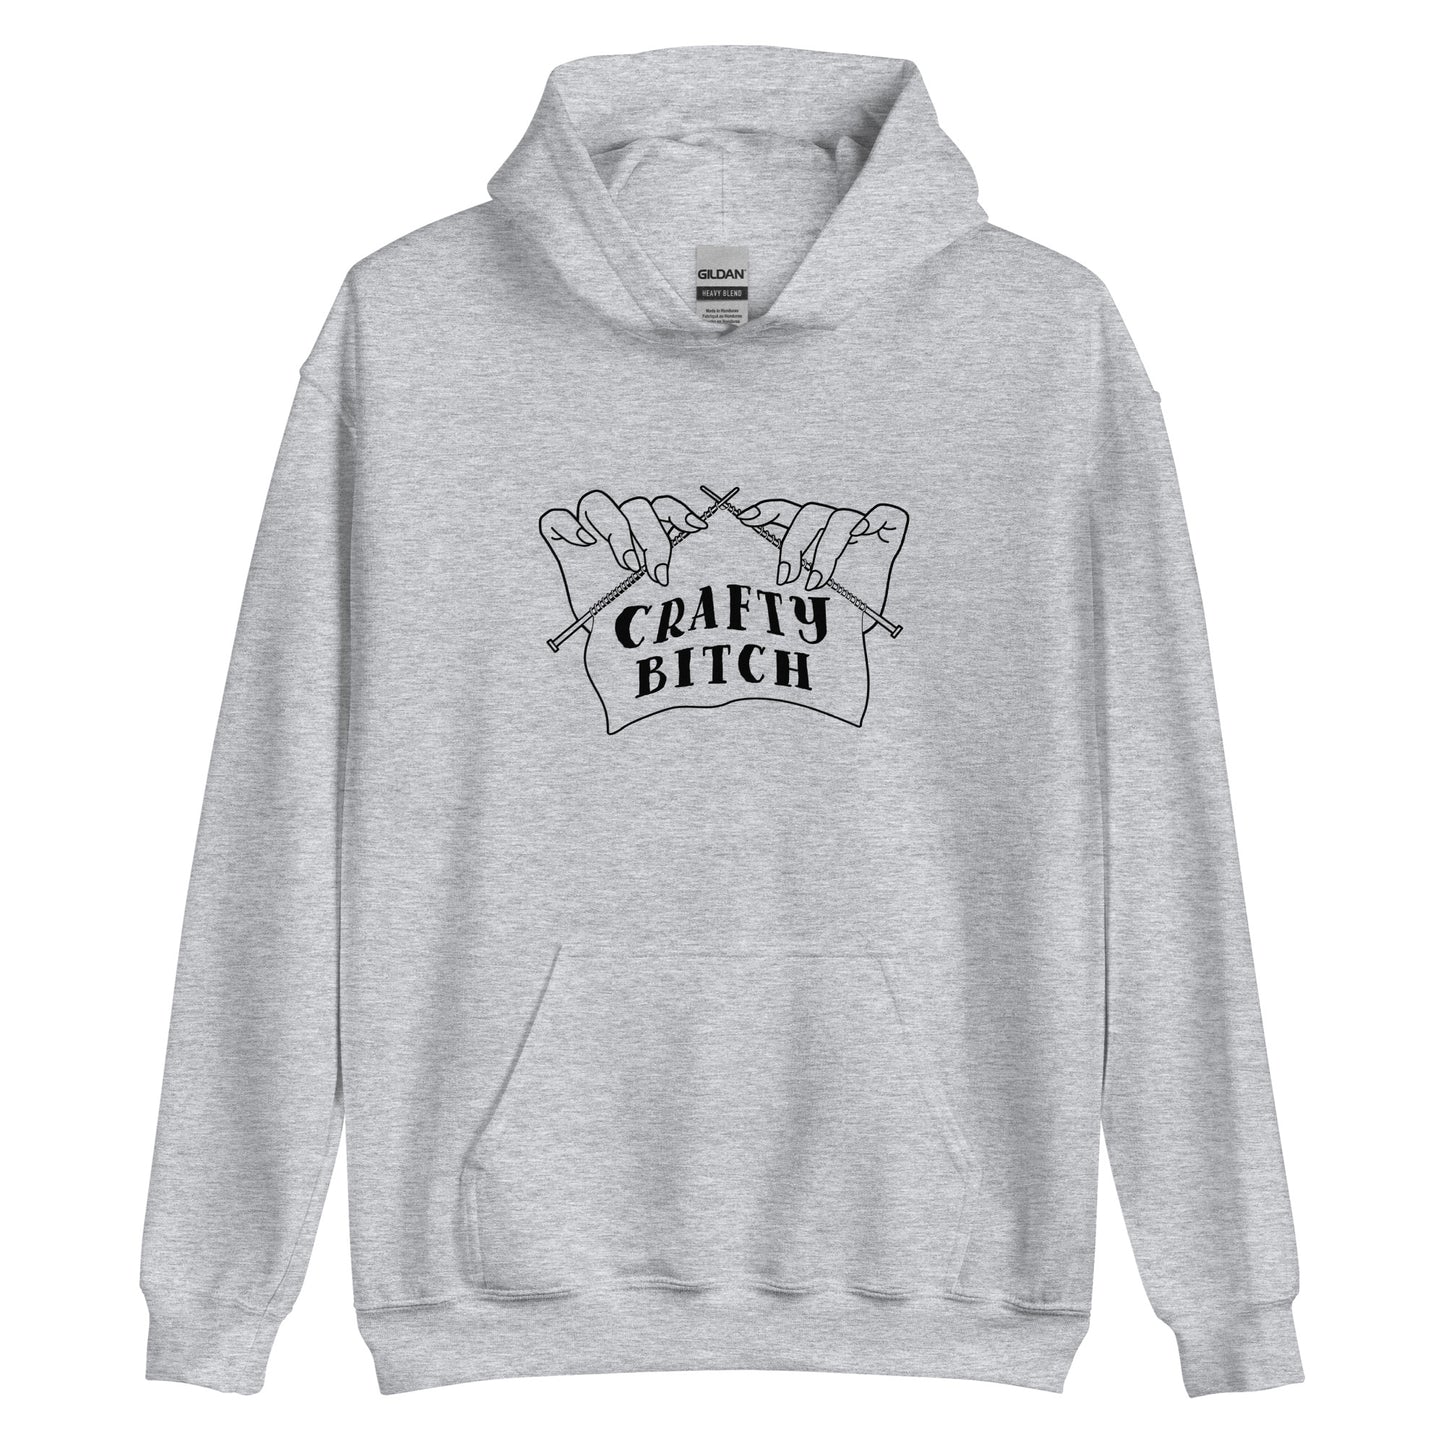 A grey hooded sweatshirt featuring a single-color illustration of a pair of hands holding knitting needles. Fabric on the needles features text that reads "crafty bitch".